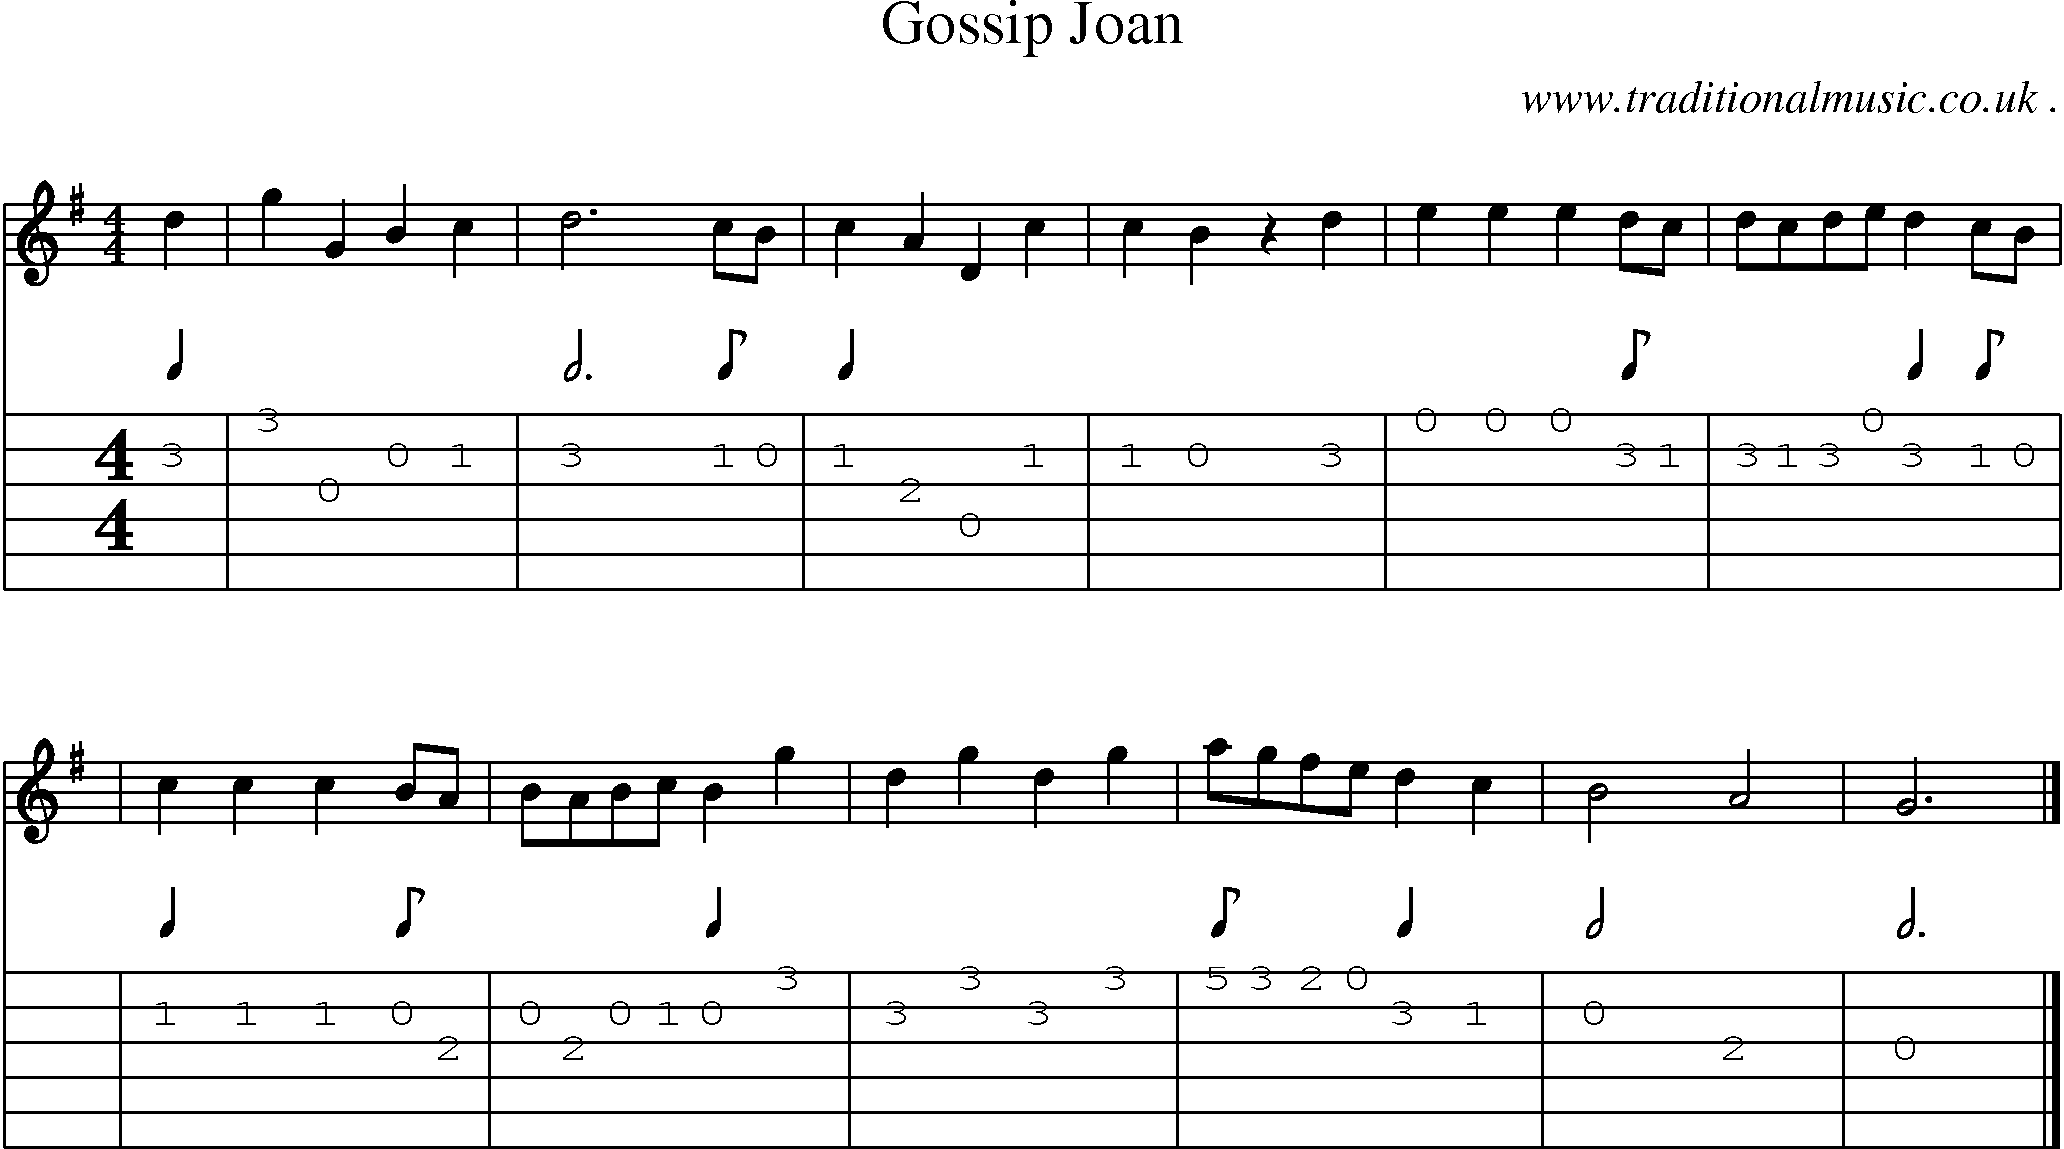 Sheet-music  score, Chords and Guitar Tabs for Gossip Joan